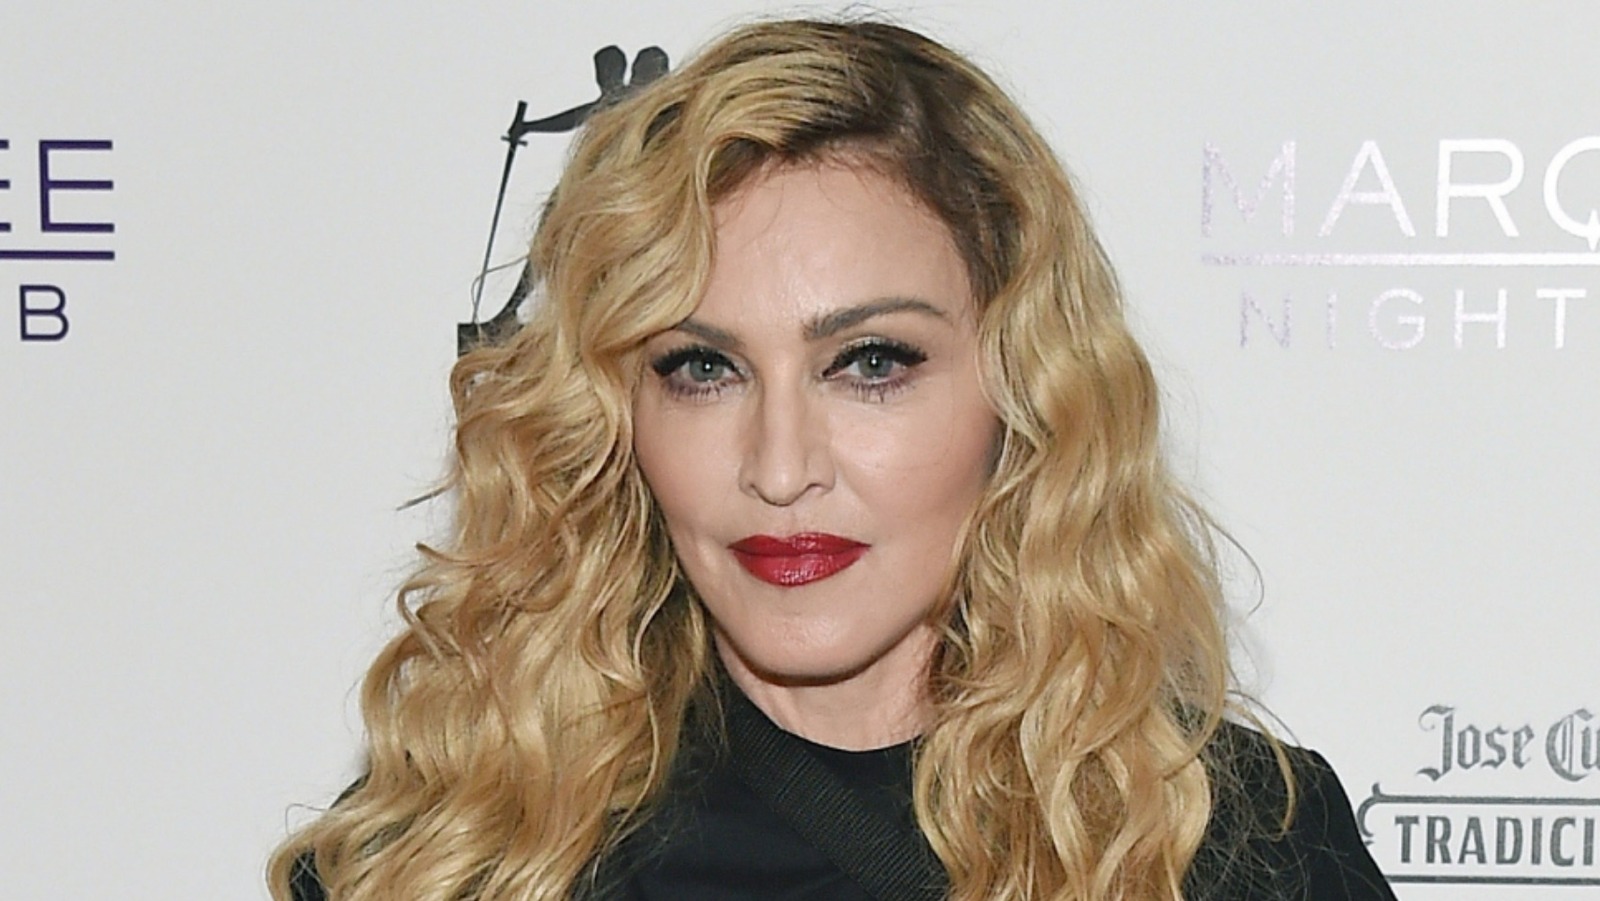 The Evolution Of Madonna's Face